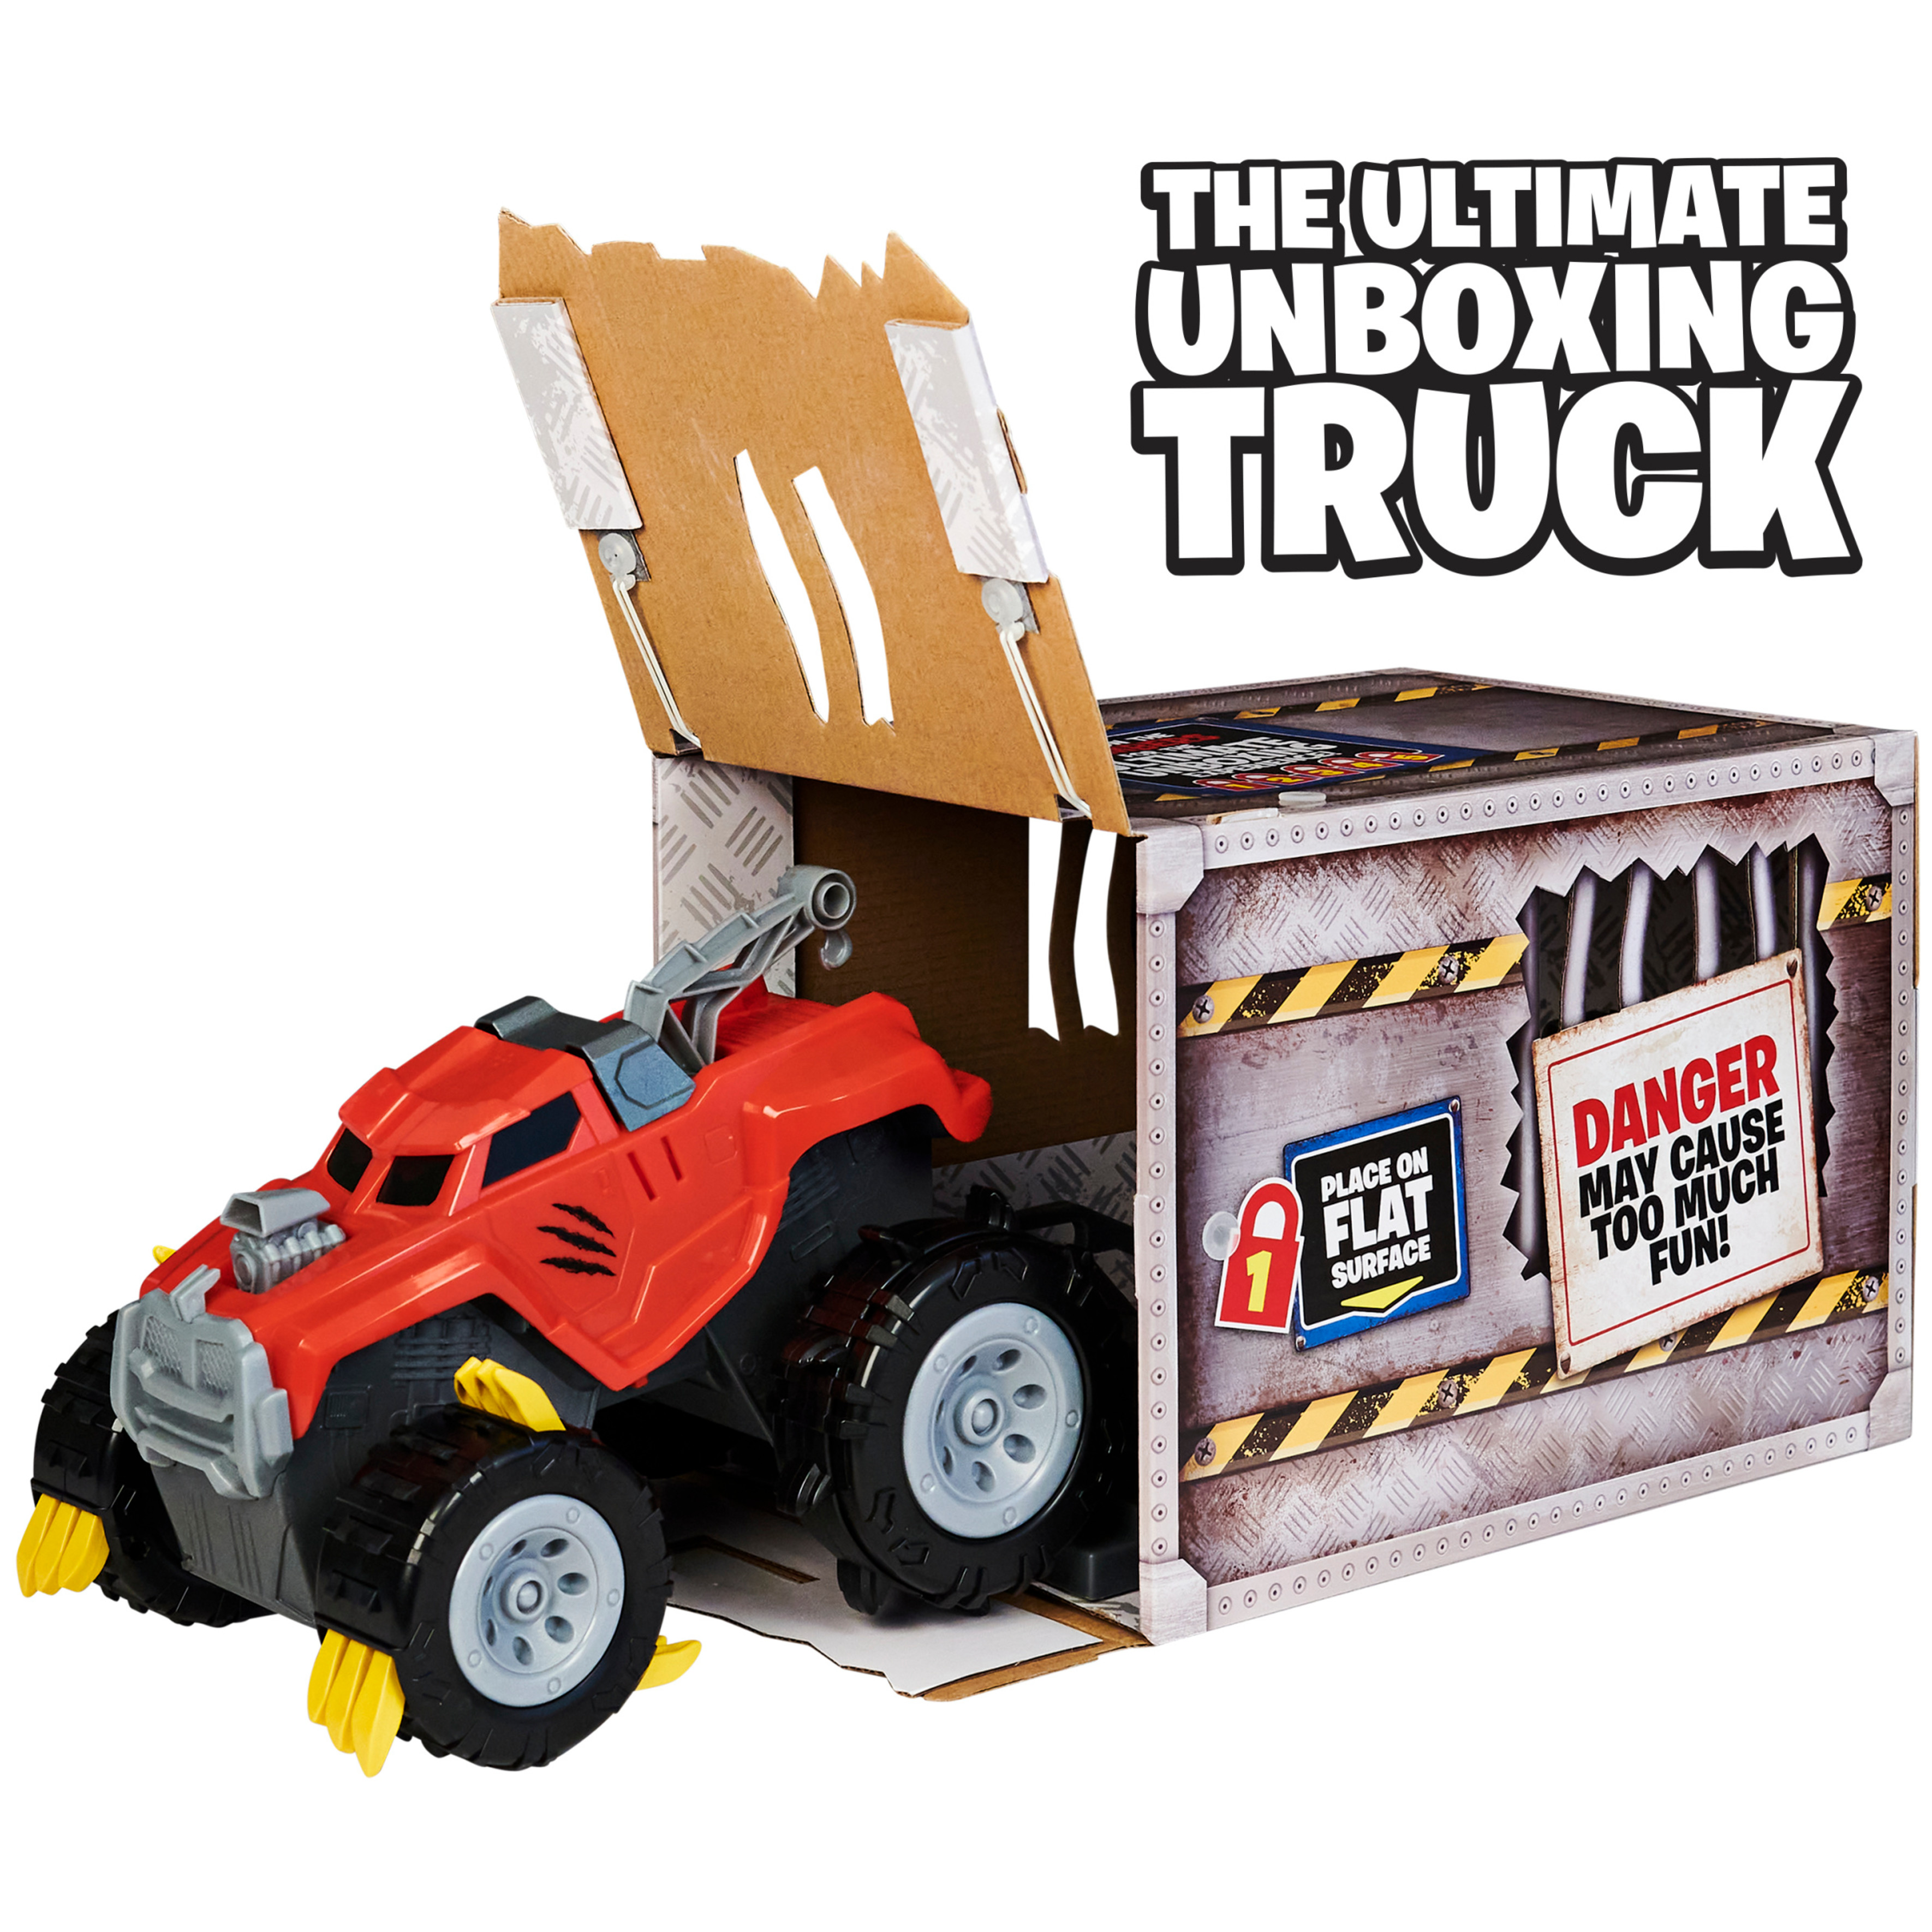 The Animal, Interactive Unboxing Toy Truck with Retractable Claws and Lights and Sounds, for Kids Aged 4 and up - image 1 of 11